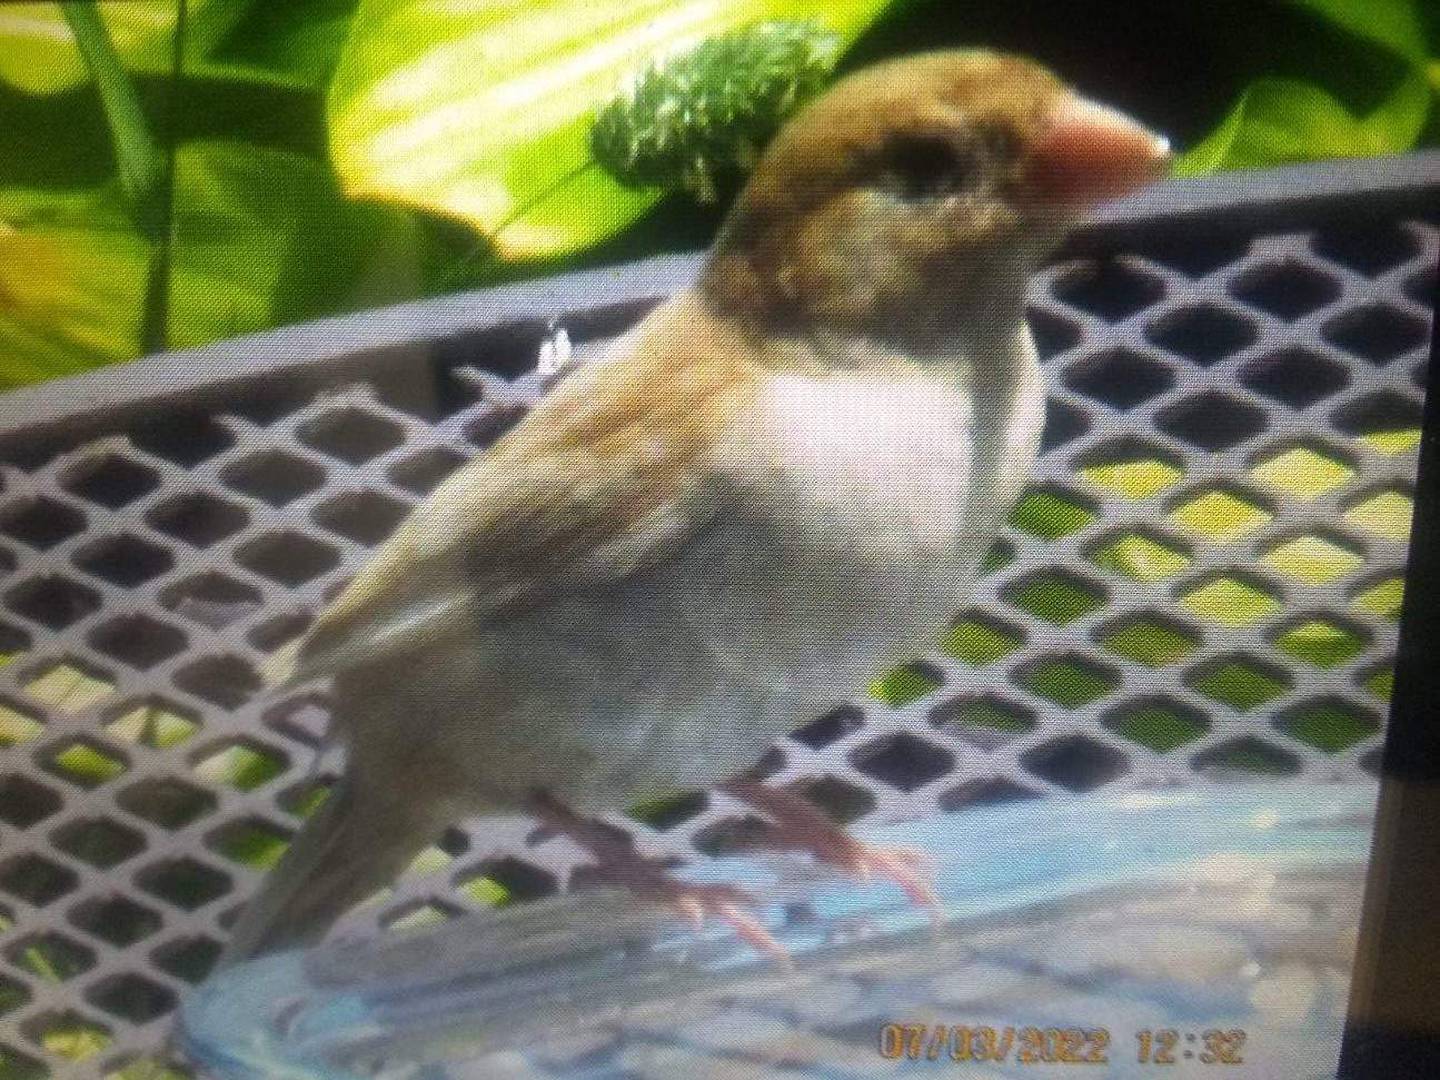 This house sparrow was one of two Terry and Barbara Ptak spotted in their Johnsburg yard the week of July 4, 2022. Both birds likely have leucism, stopping melanin from going to their feathers.